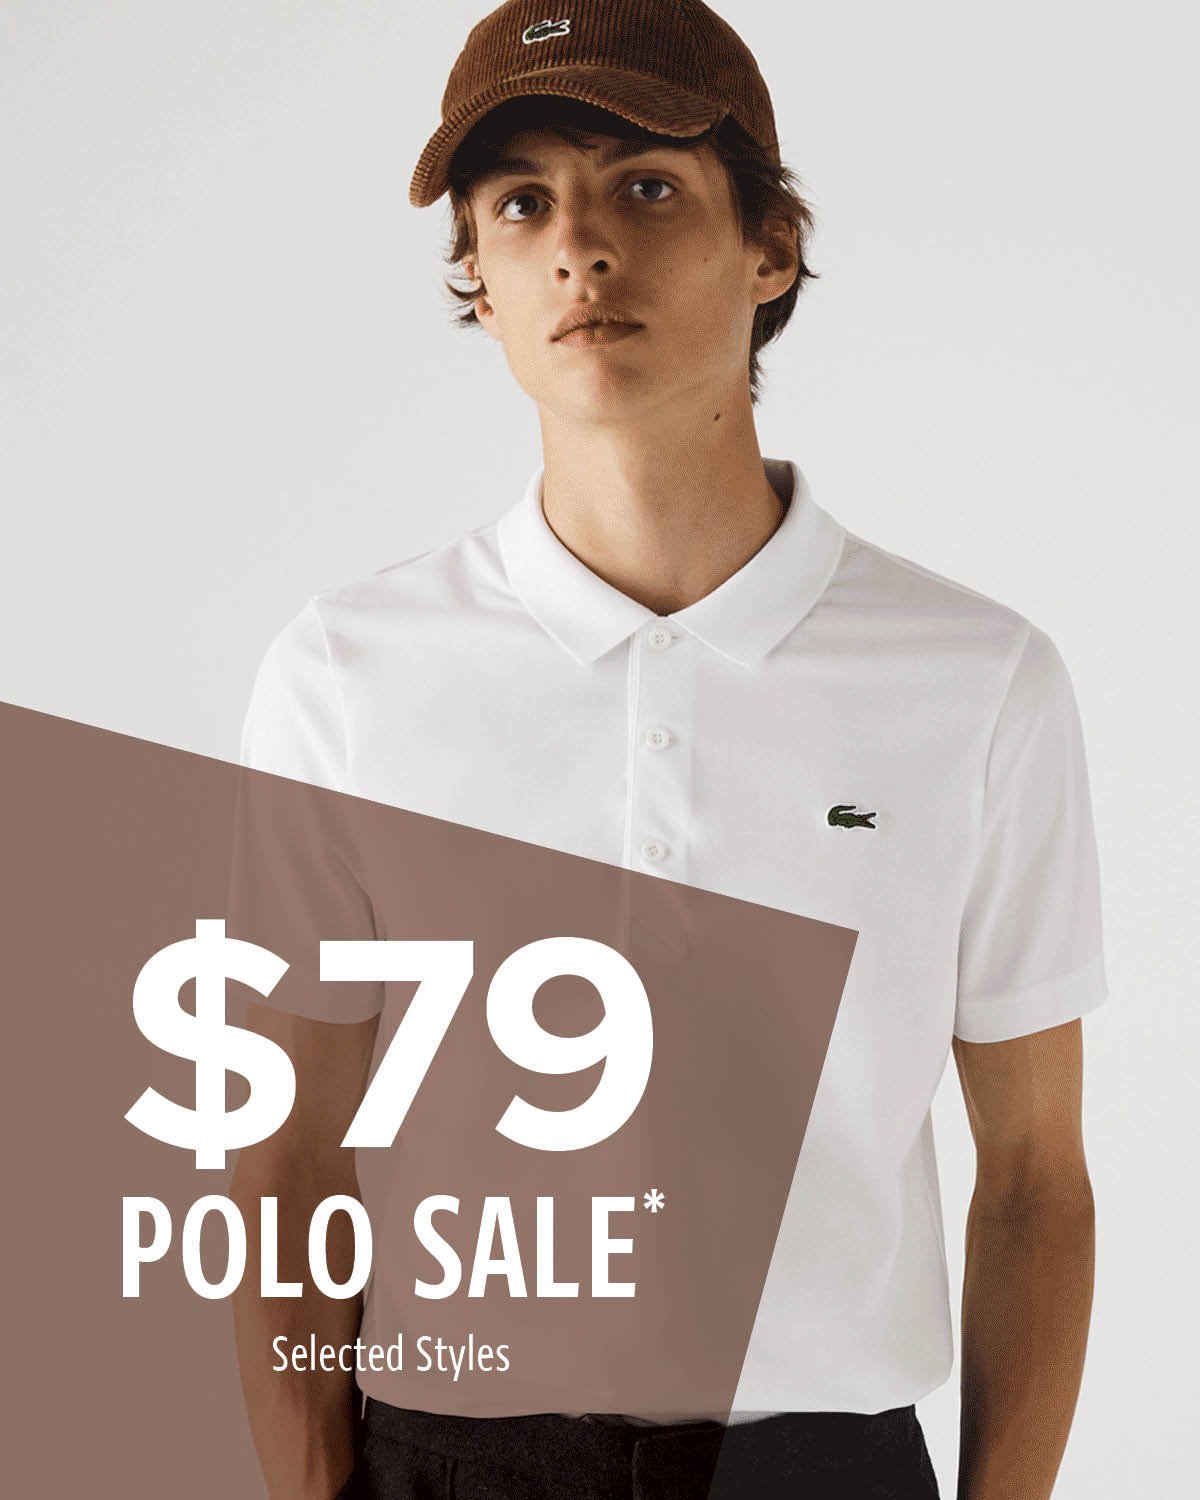 lacoste free shipping